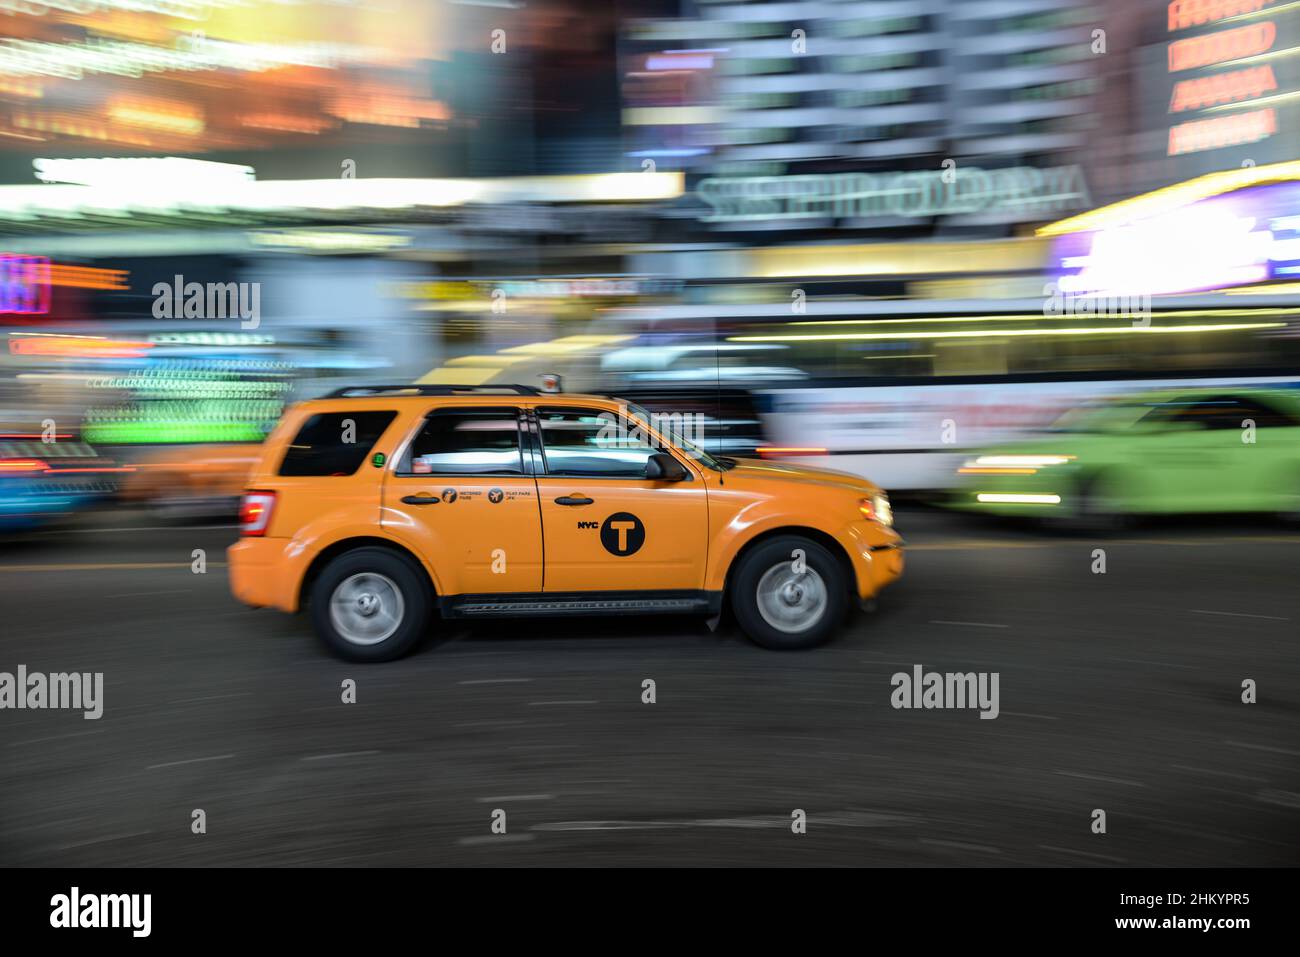 Quick pan of a yellow taxi passing through the Times Square area in NYC, USA Stock Photo